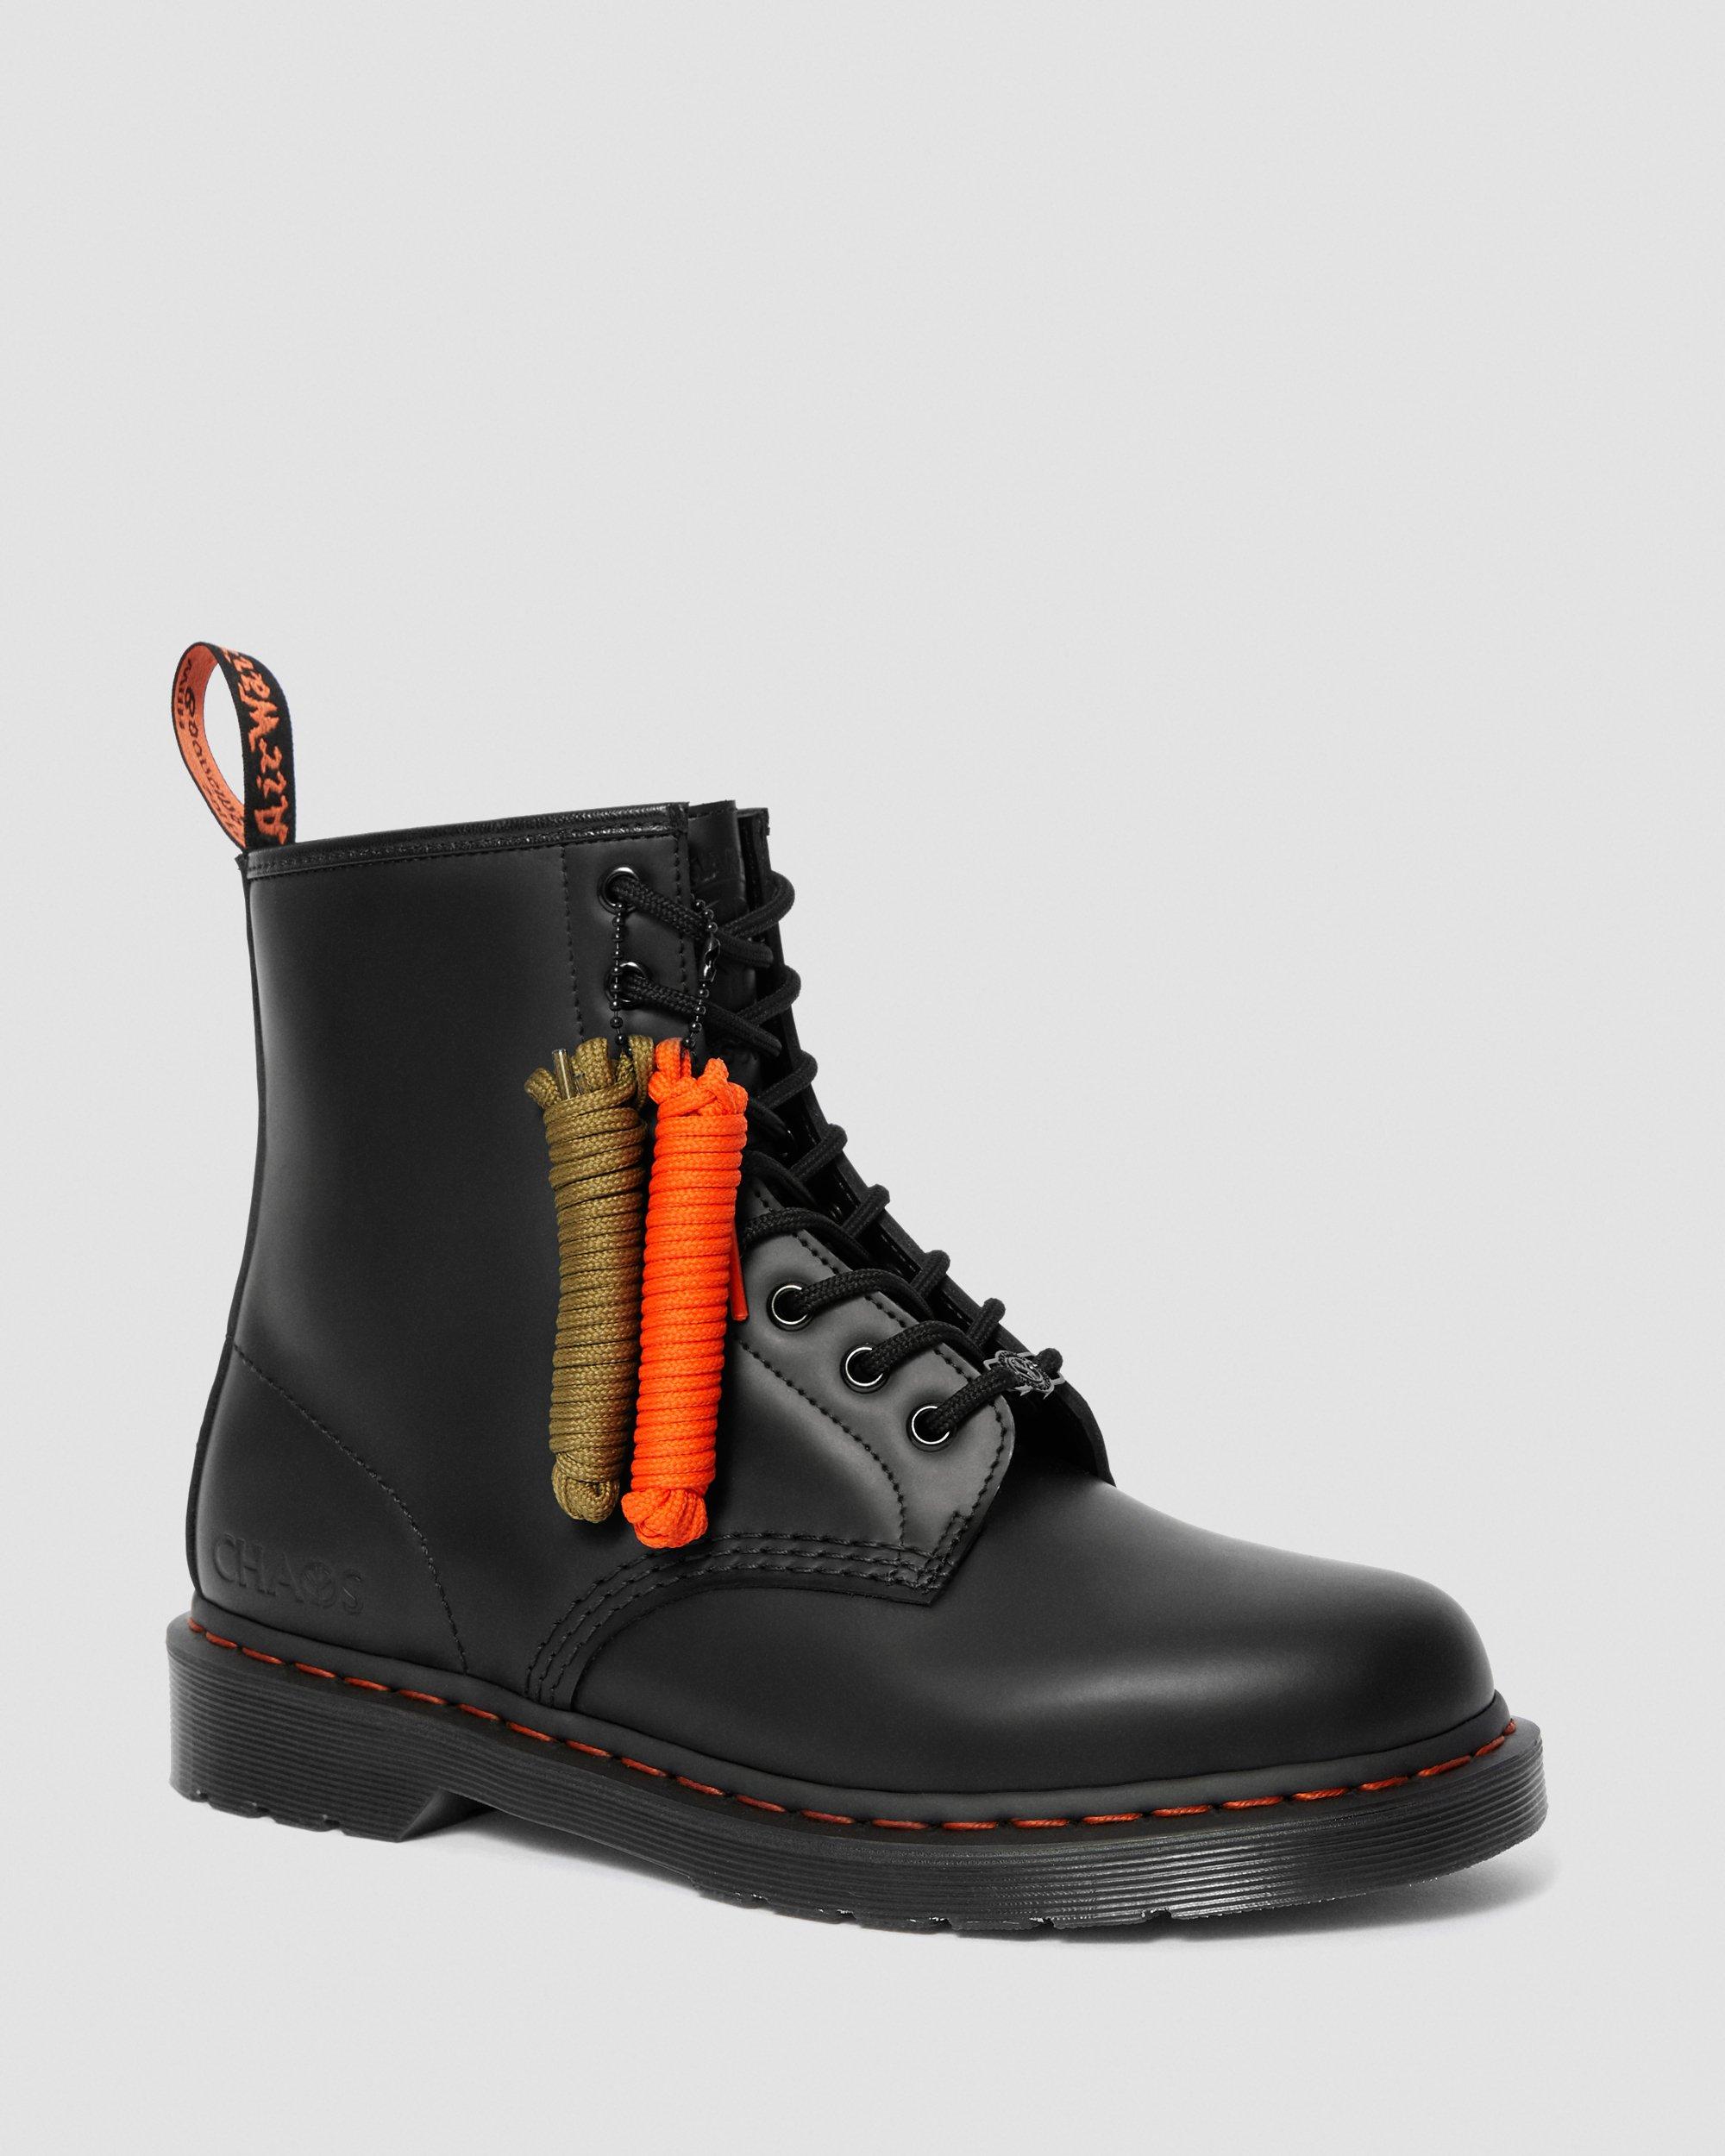 1460 Beams X Babylon Smooth Leather Boots in Black | Dr. Martens